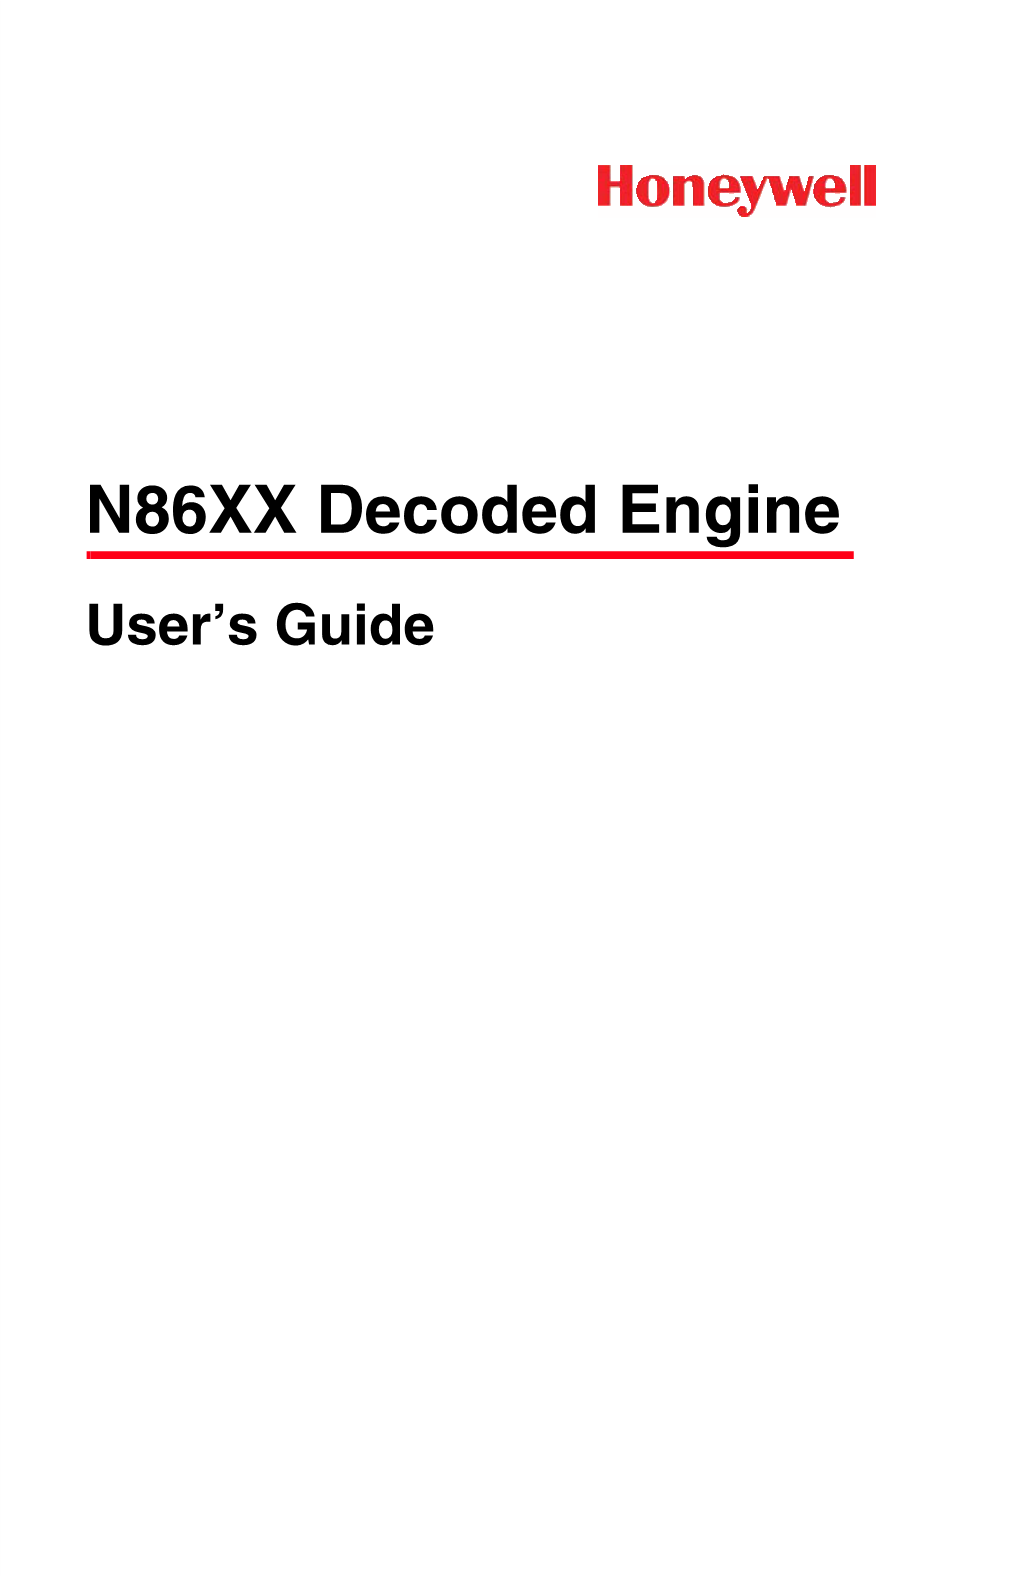 N86XX Decoded Engine User's Guide